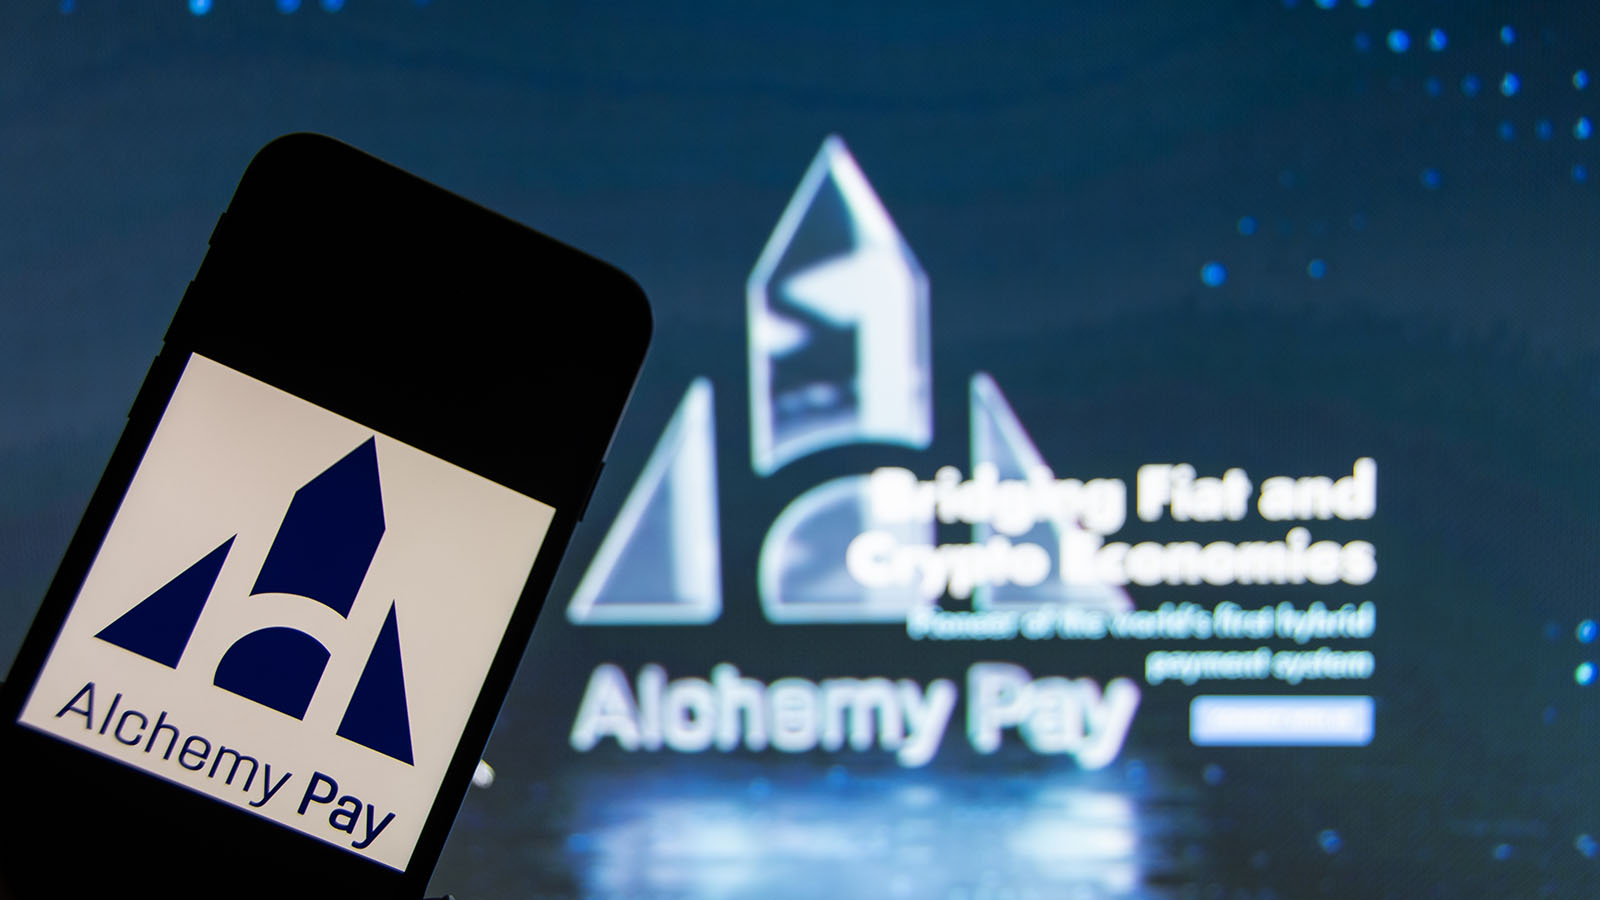 An iPhone with the Alchemy Pay (ACH) logo on the screen.